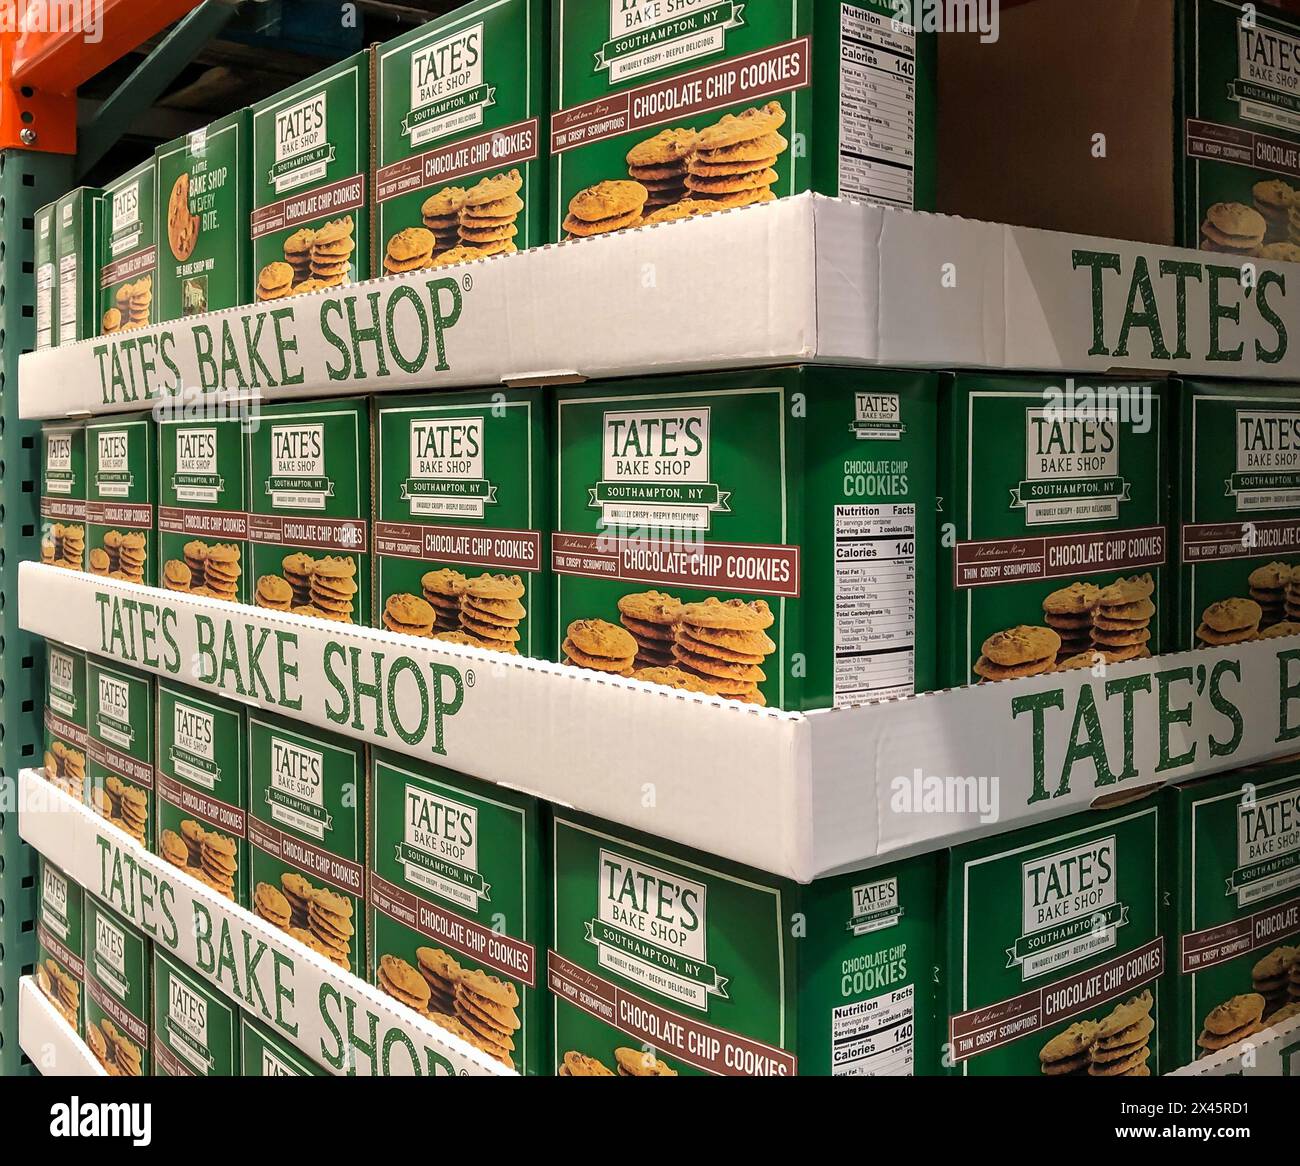 BAXTER, MN - 3 FEB 2021: Boxes of Tates Bake Shop chocolate chip cookies on display and for sale in a retail store. Stock Photo